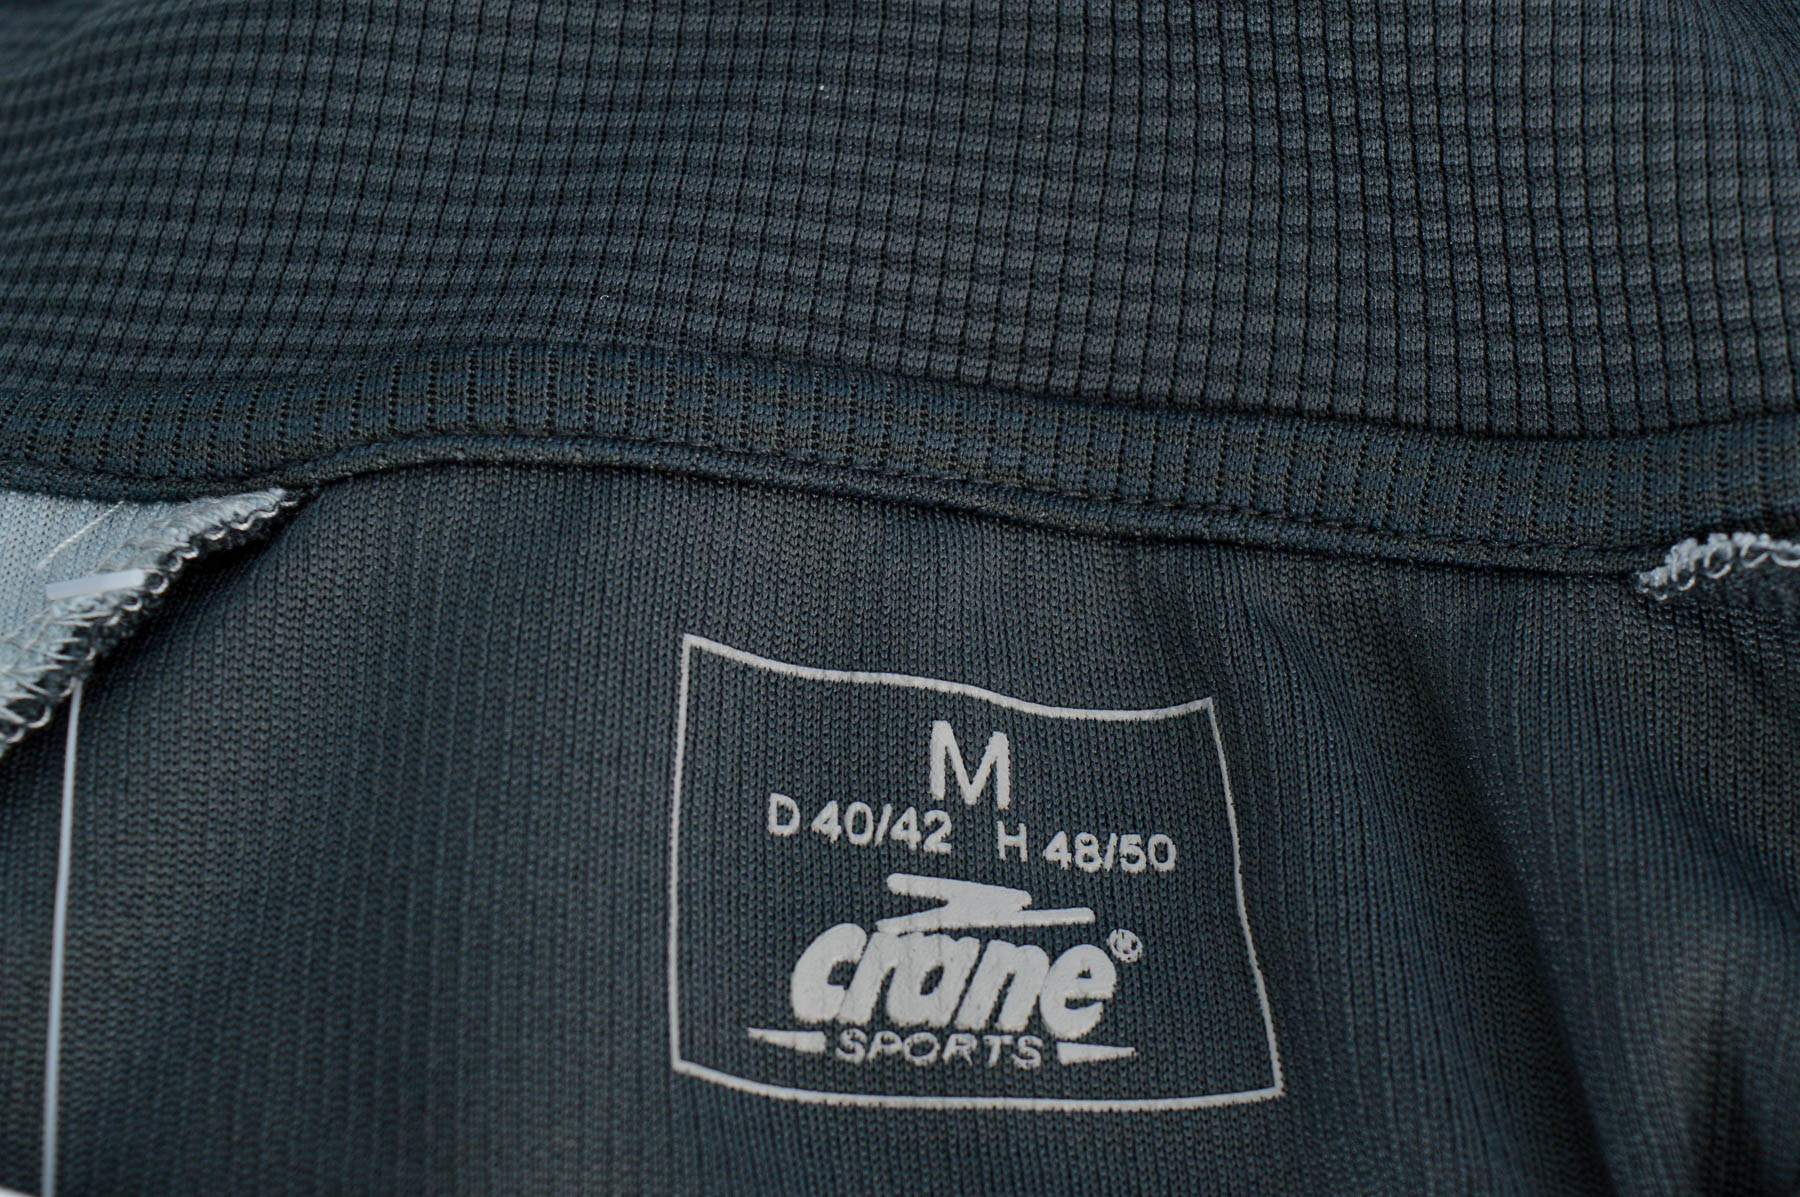 Male sports top for cycling - CRANE SPORTS - 2